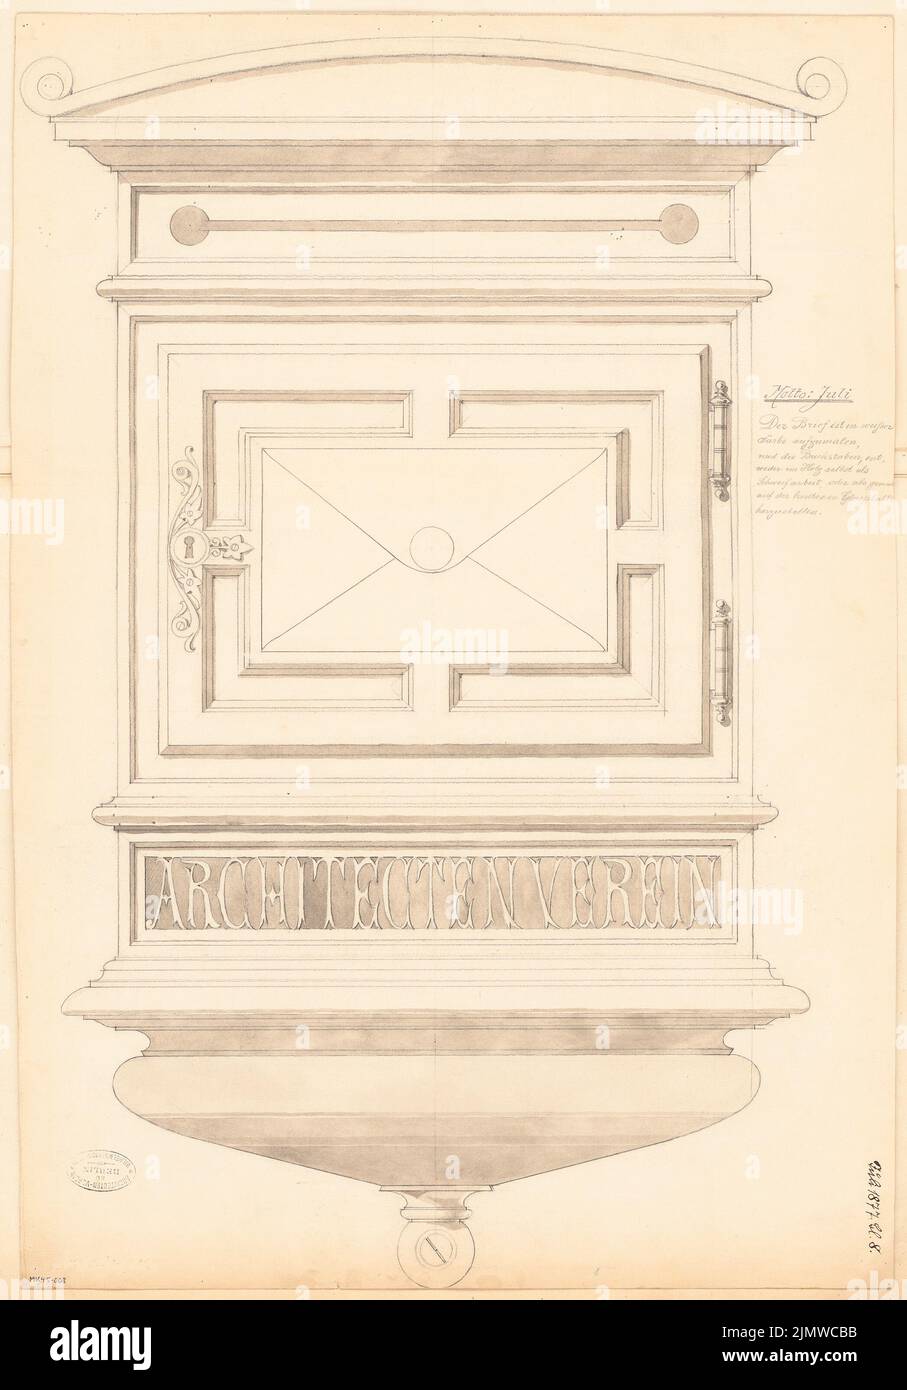 Unknown architect, house letter box for the architect association in Berlin. Monthly competition in July 1877 (07.1877): Riss front view 1: 1; Explanation text. Pencil watercolor on the box, 71.6 x 50 cm (including scan edges) N.N. : Hausbriefkasten für den Architekten-Verein zu Berlin. Monatskonkurrenz Juli 1877 Stock Photo